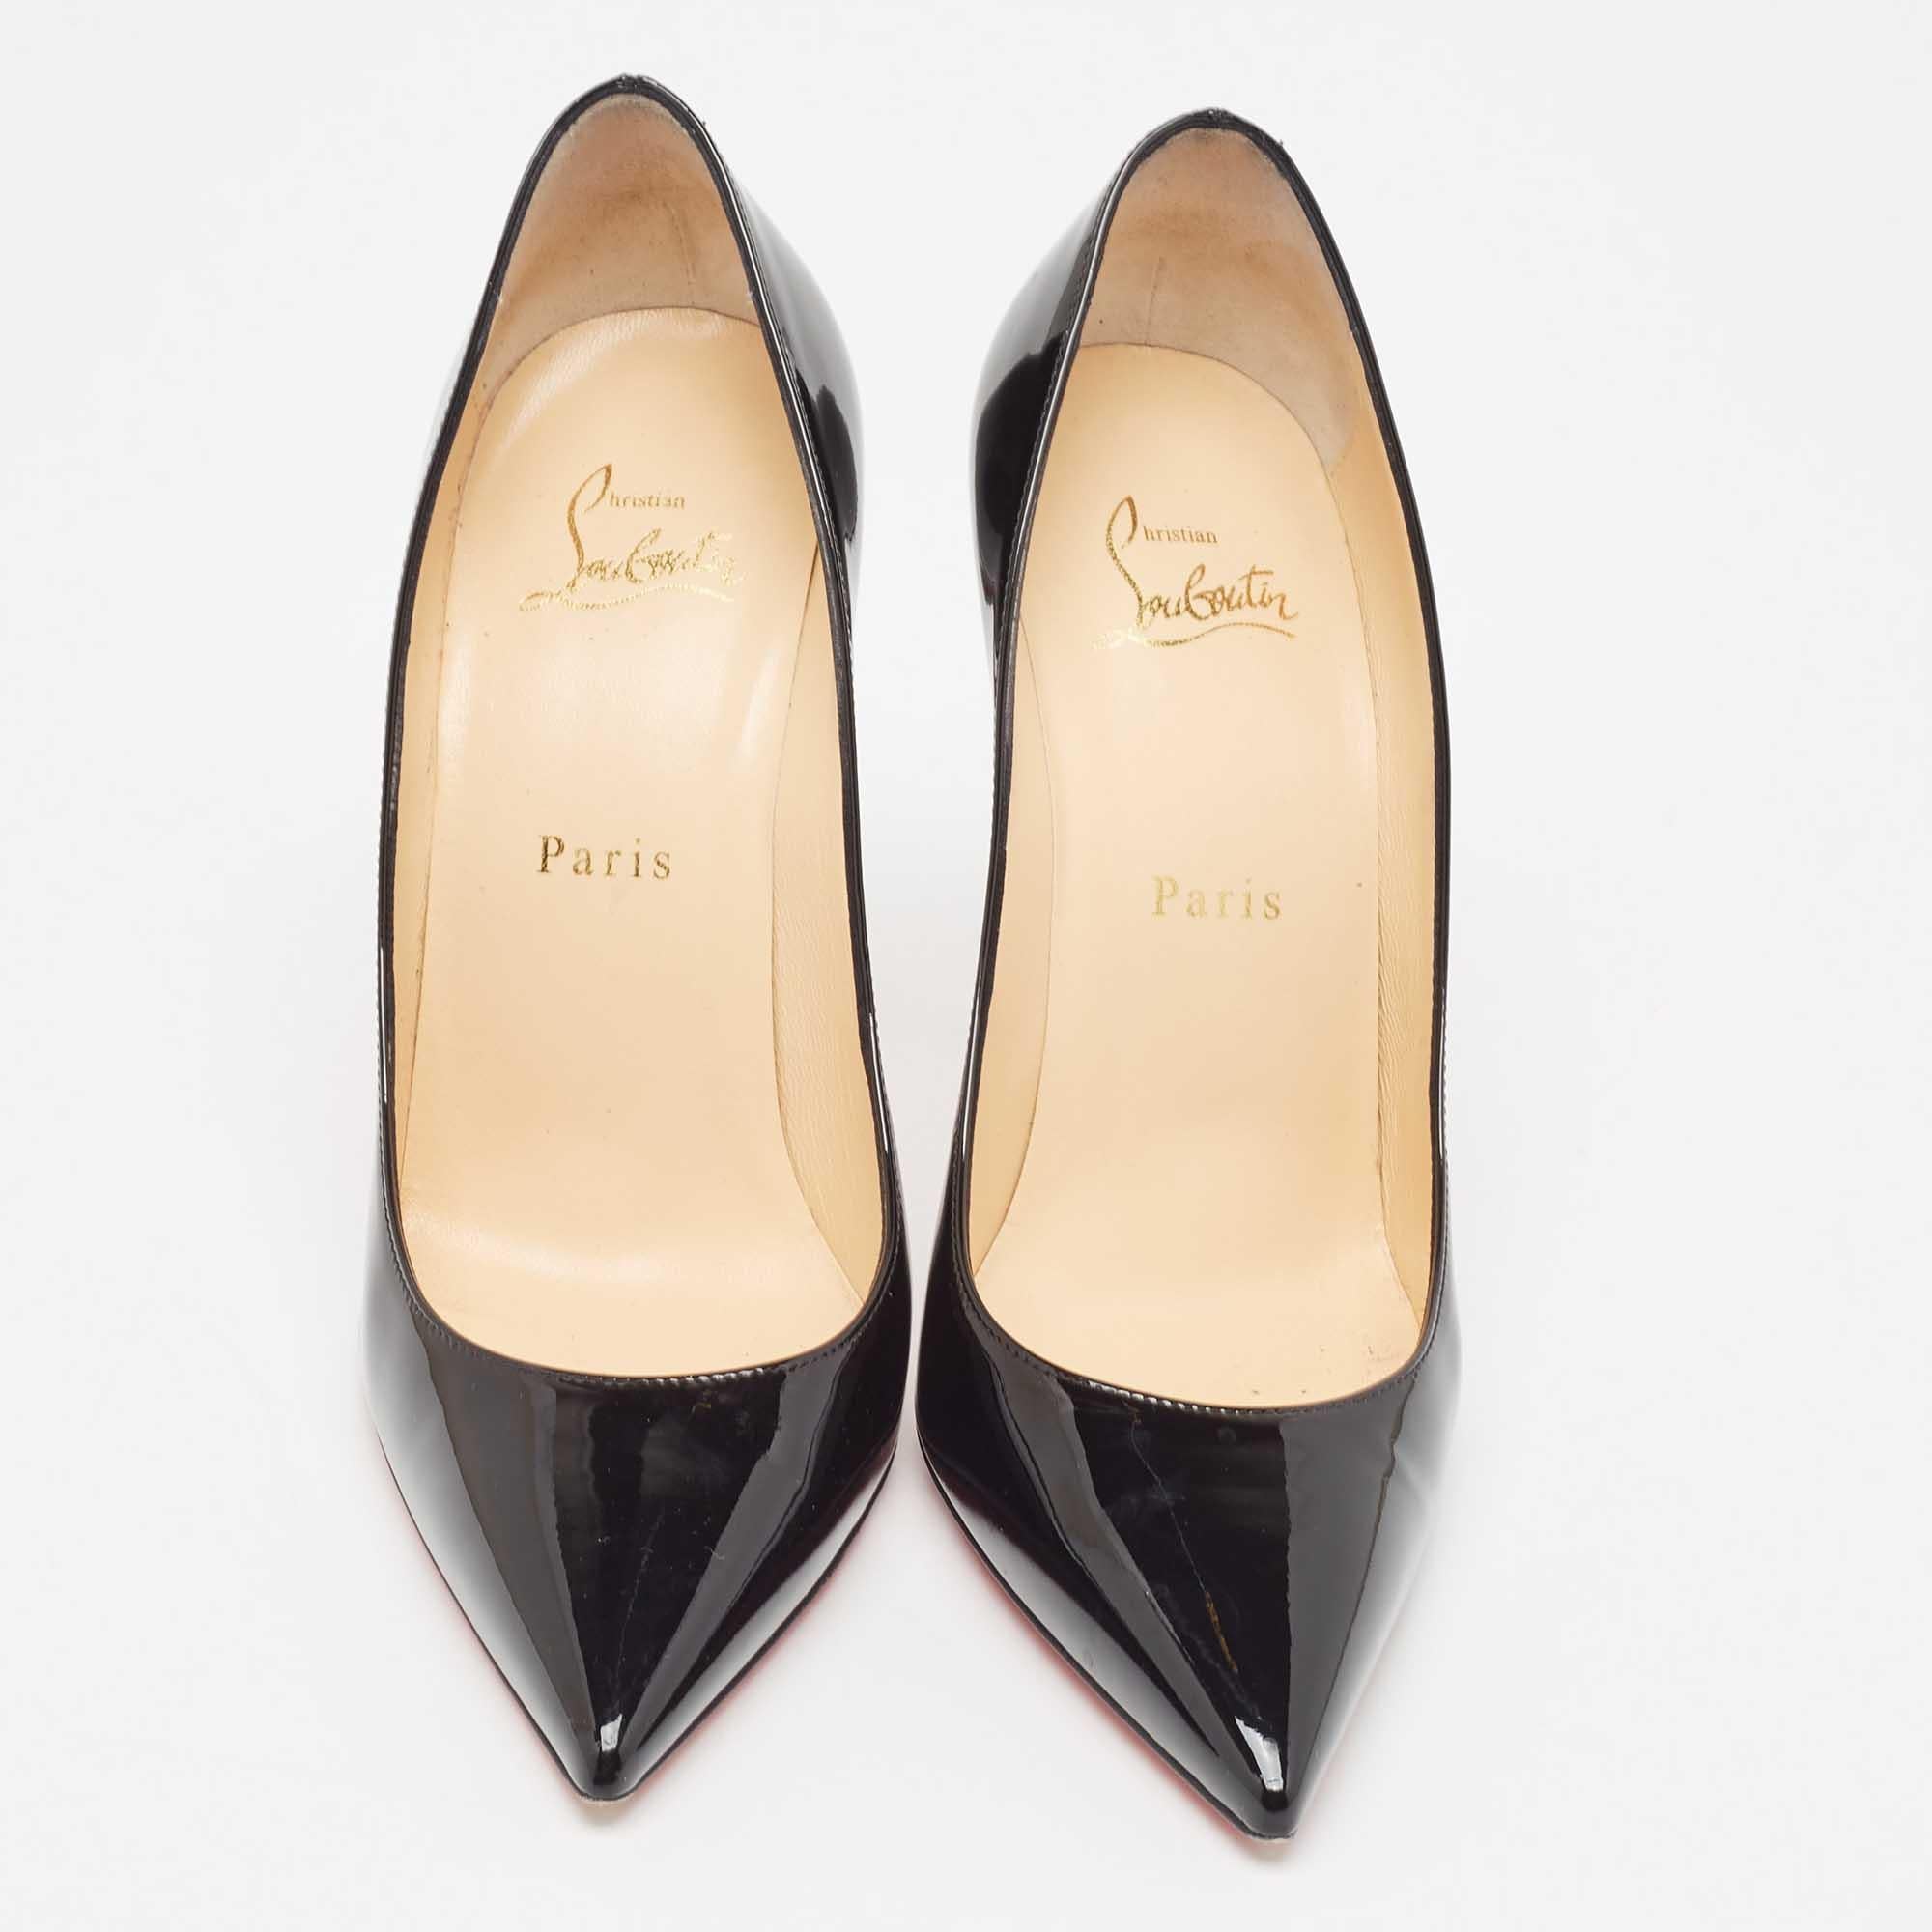 The fashion house’s tradition of excellence, coupled with modern design sensibilities, works to make these Christian Louboutin pumps a fabulous choice. They'll help you deliver a chic look with ease.

Includes: Original Dustbag, Original Box, Extra